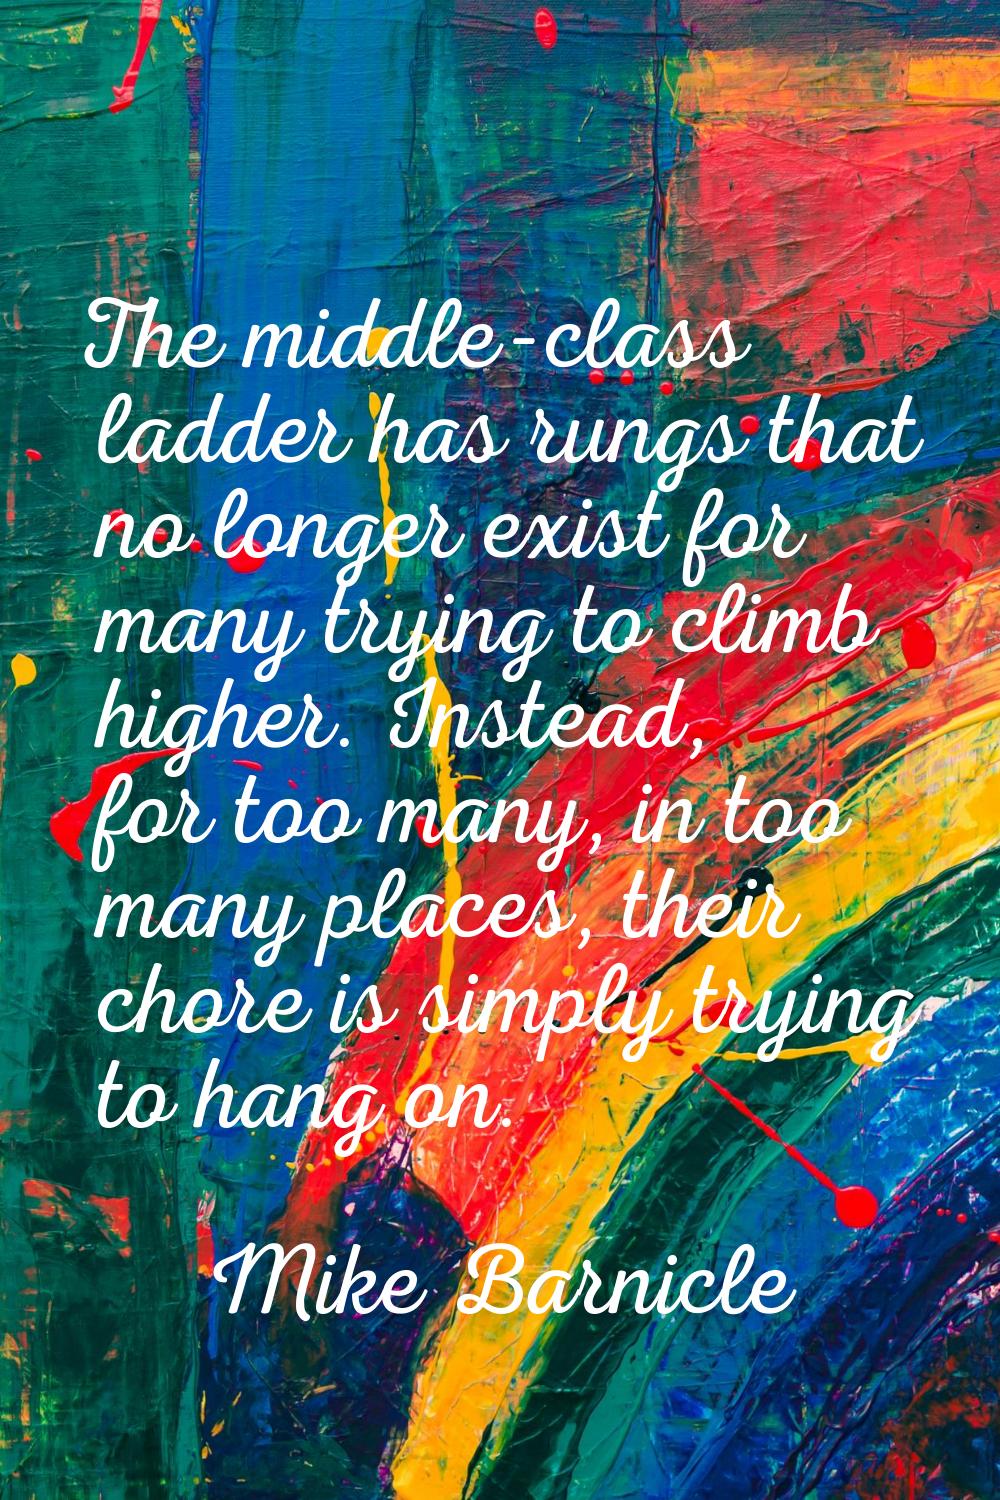 The middle-class ladder has rungs that no longer exist for many trying to climb higher. Instead, fo